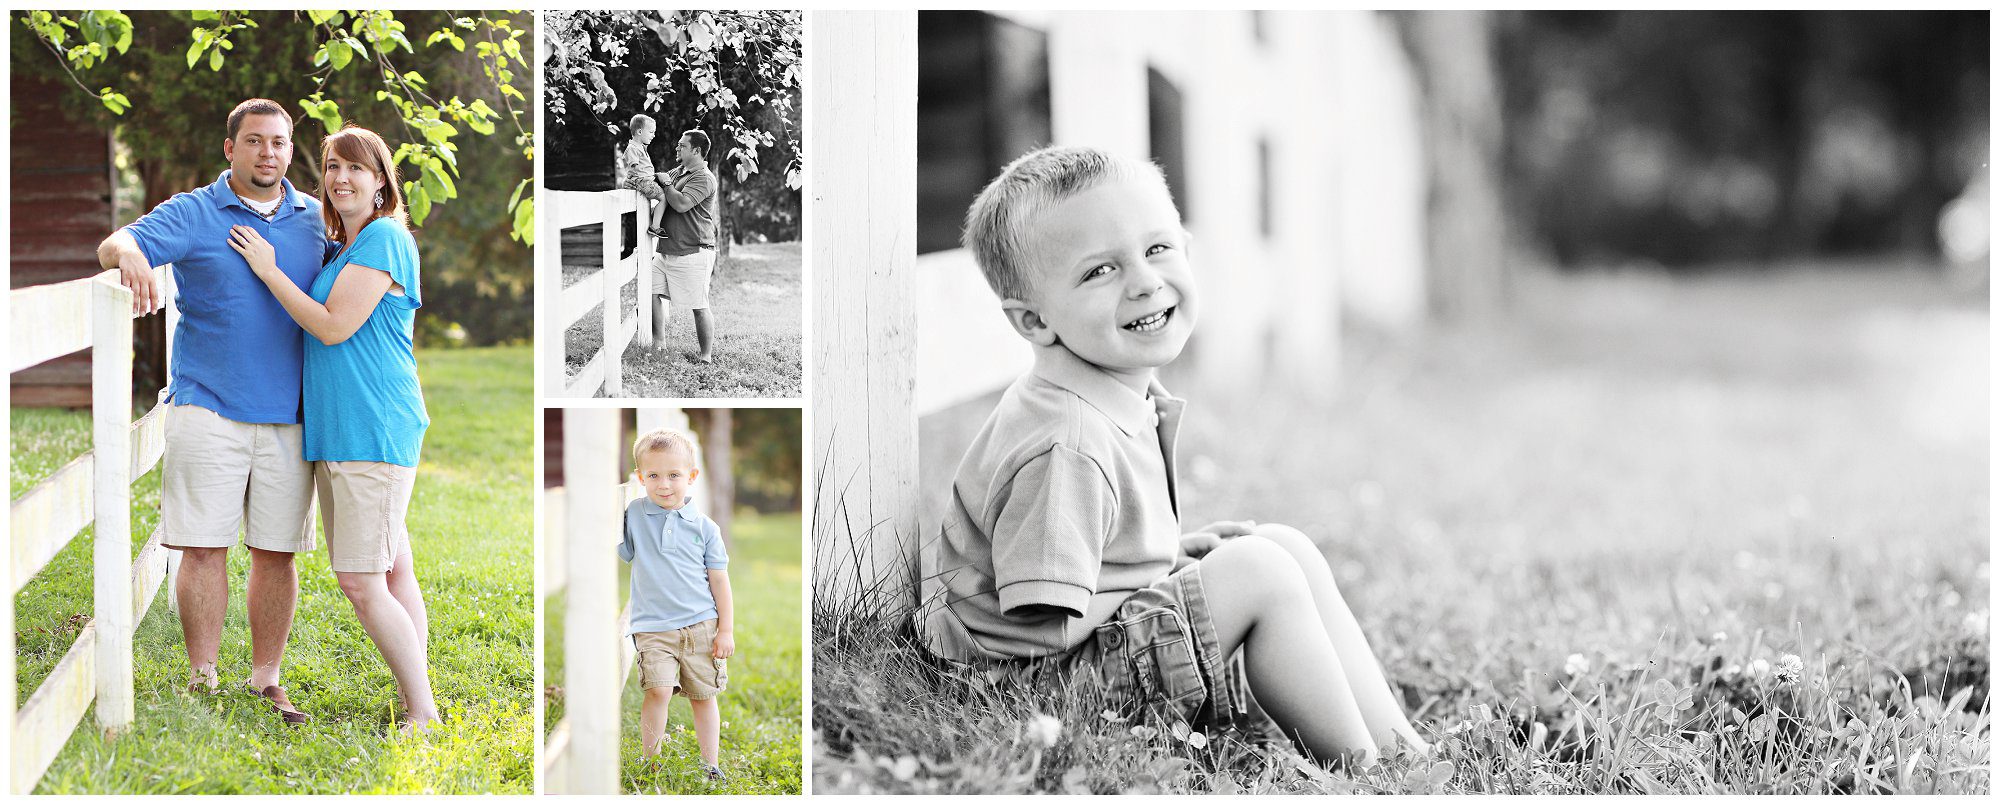 Charlottesville Family Portraits in Fluvanna at Pleasant grove Richmond palmyra pictures photography natural light farm